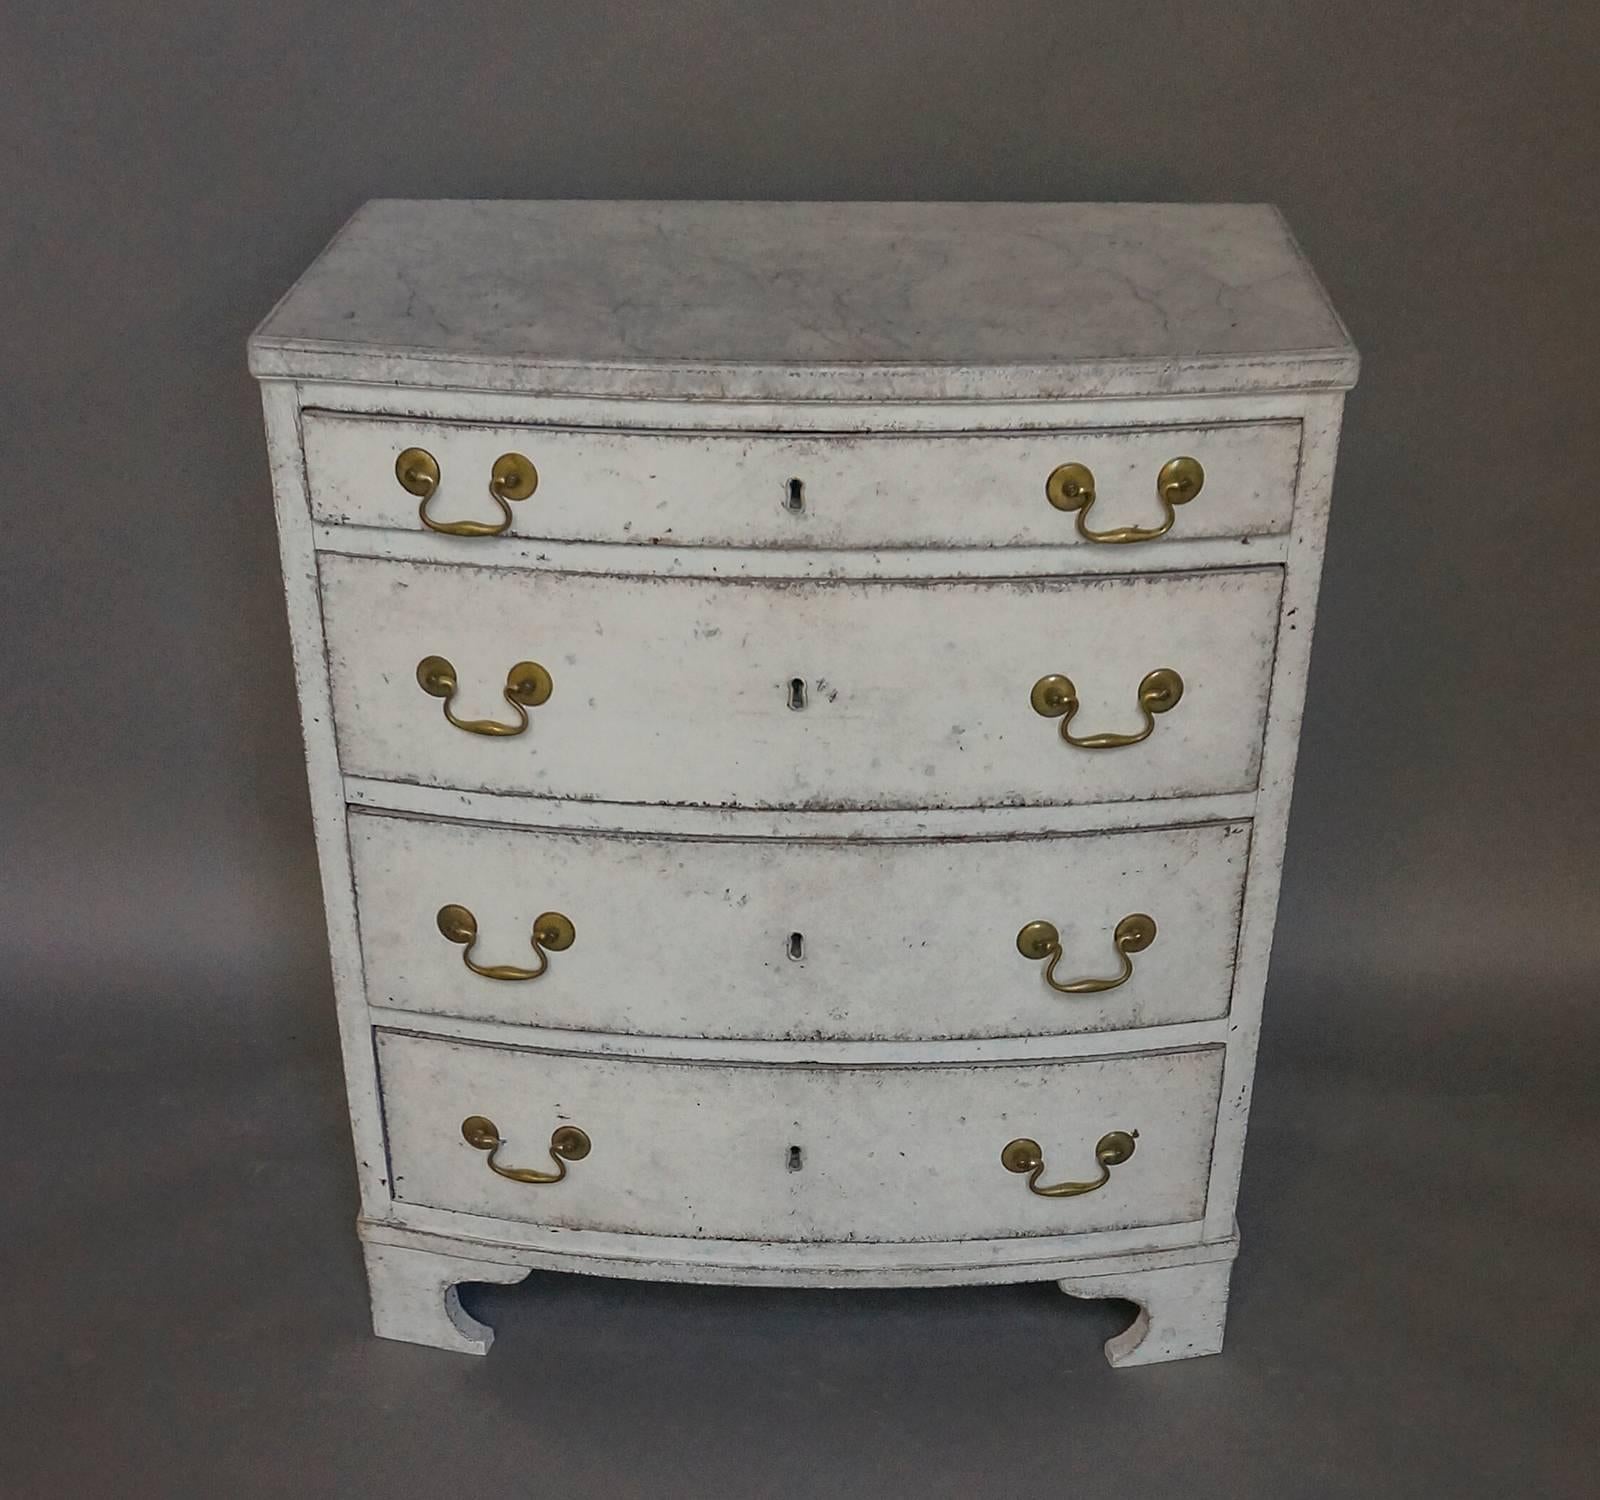 Swedish chest of drawers, circa 1810, with curved form and gray marbled top and shaped bracket base. The four drawers retain their original locks. Small size makes this piece useful in many situations.